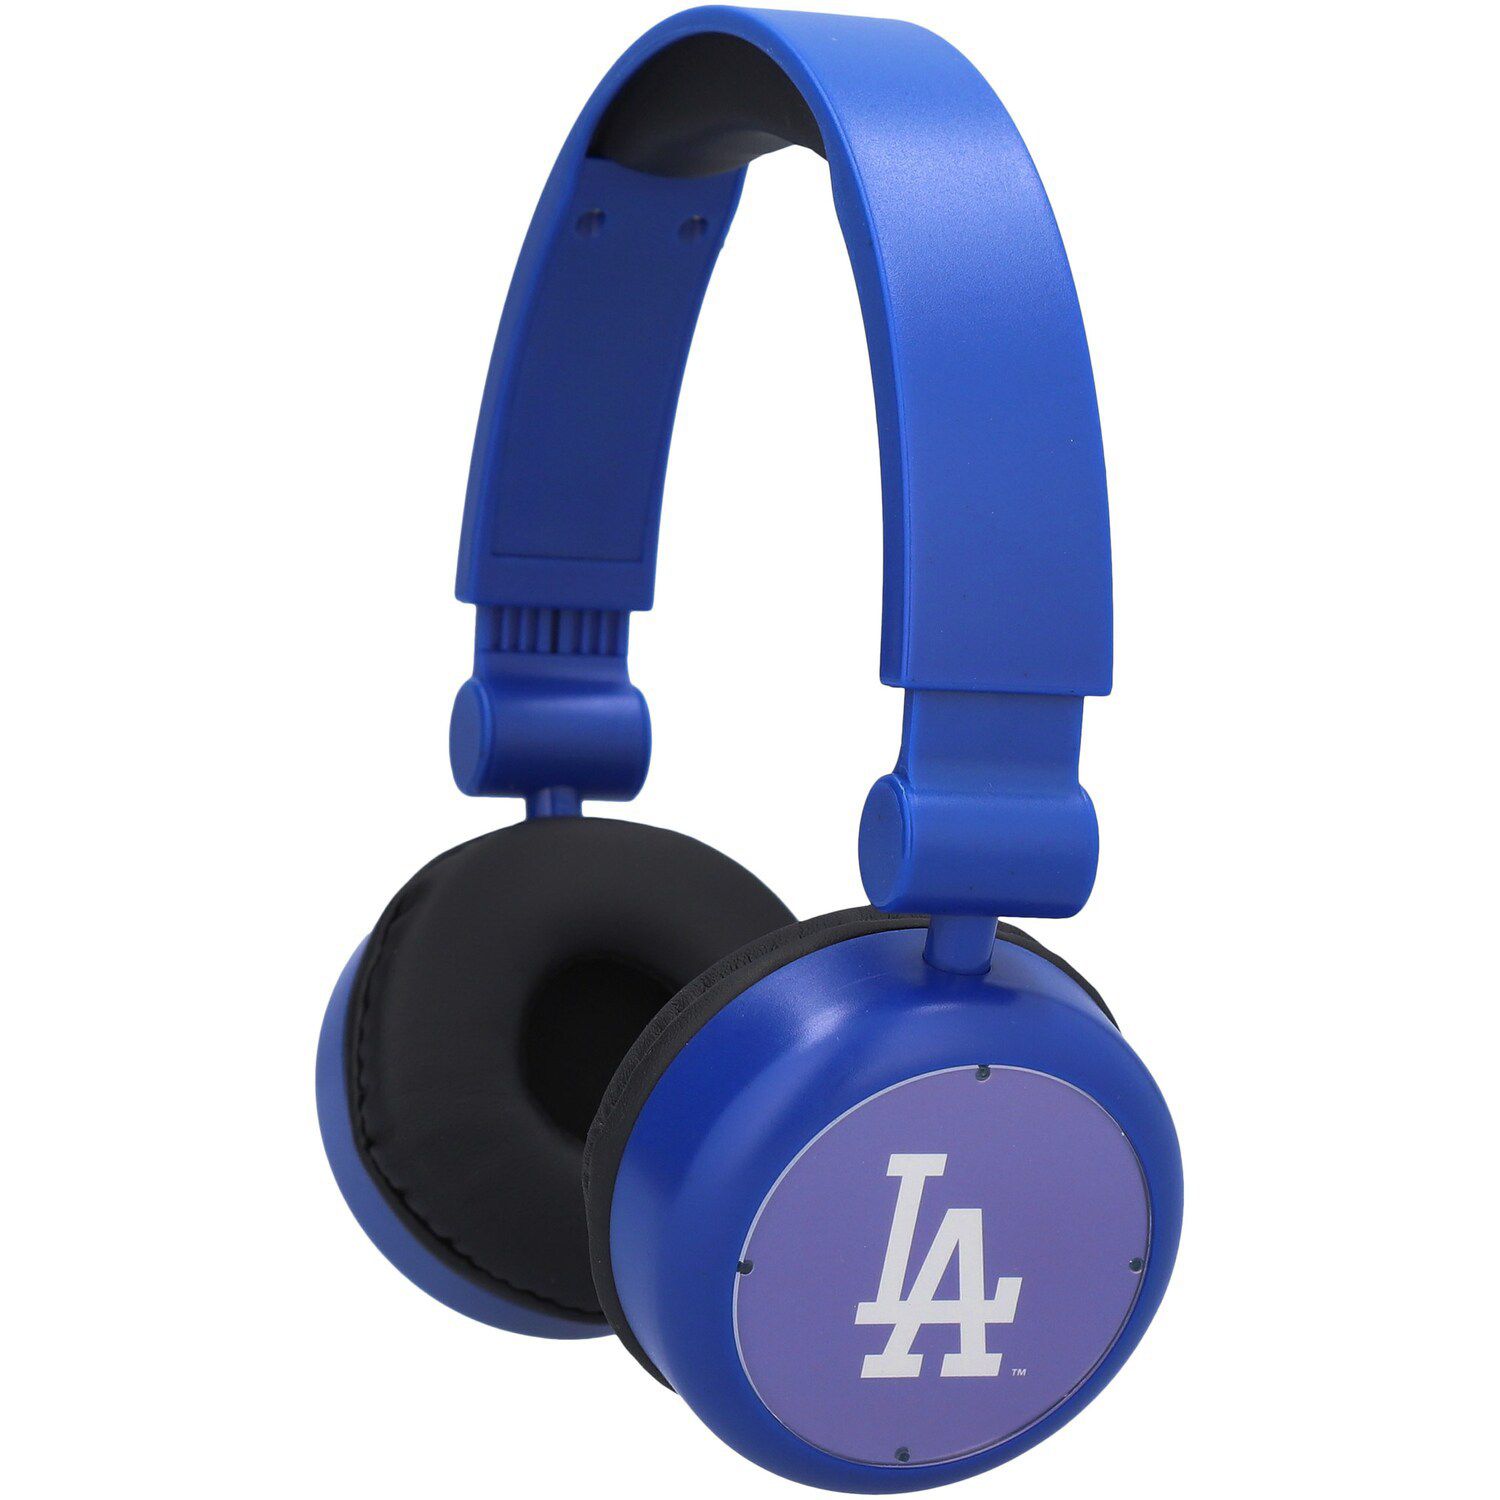 Image for Unbranded Los Angeles Dodgers Wireless Headphones at Kohl's.